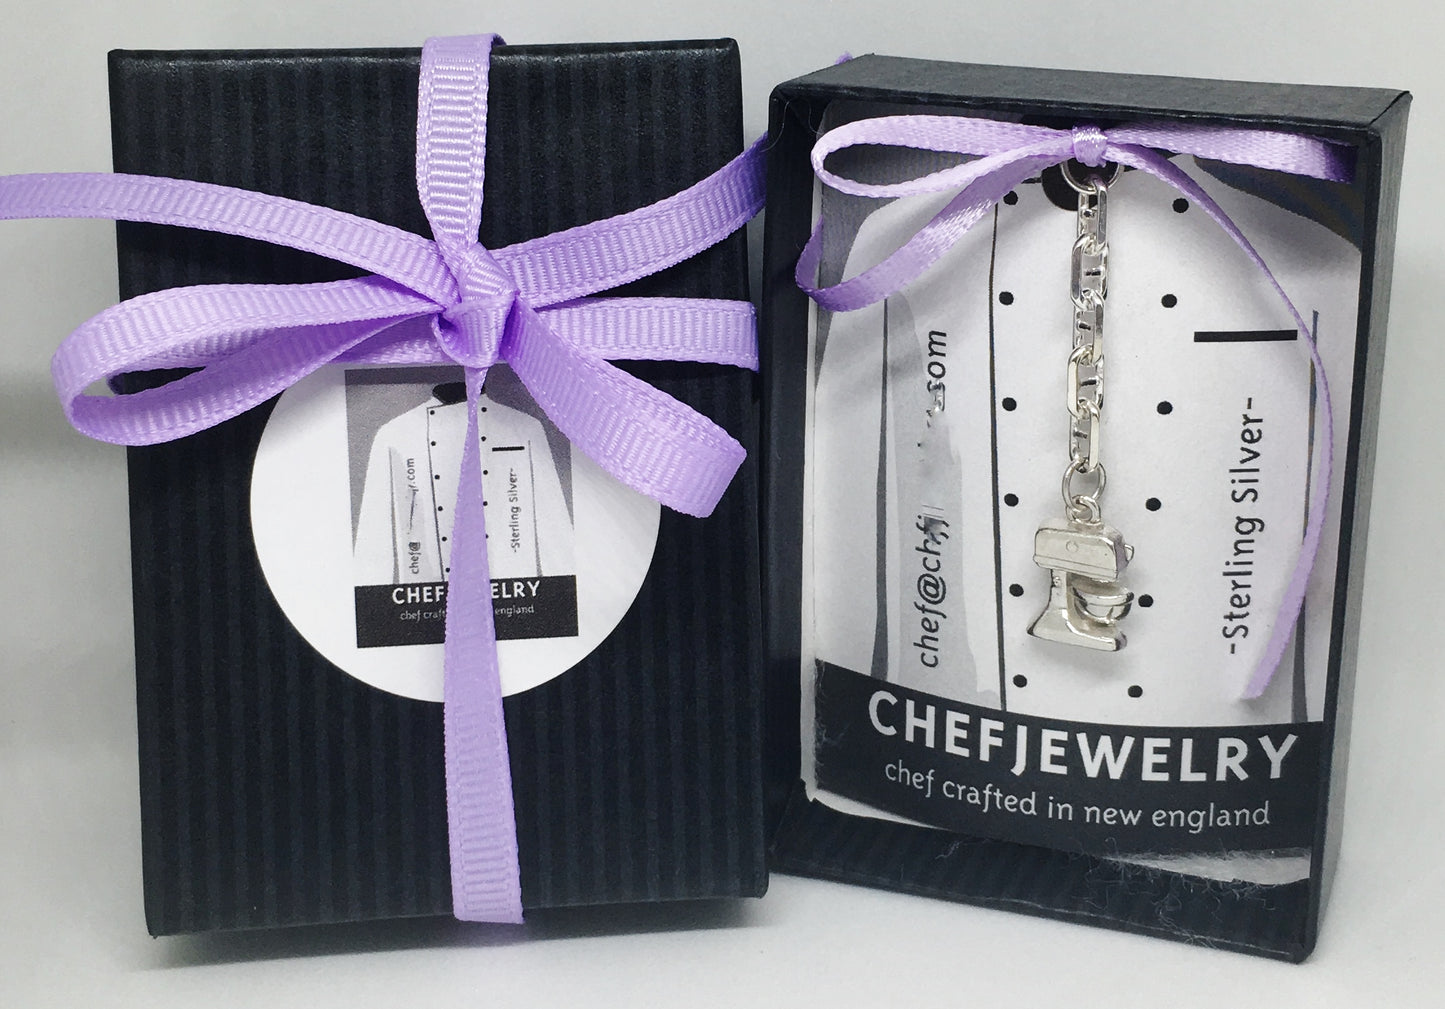 Your chef earring will arrive in custom ChefJewelry packaging